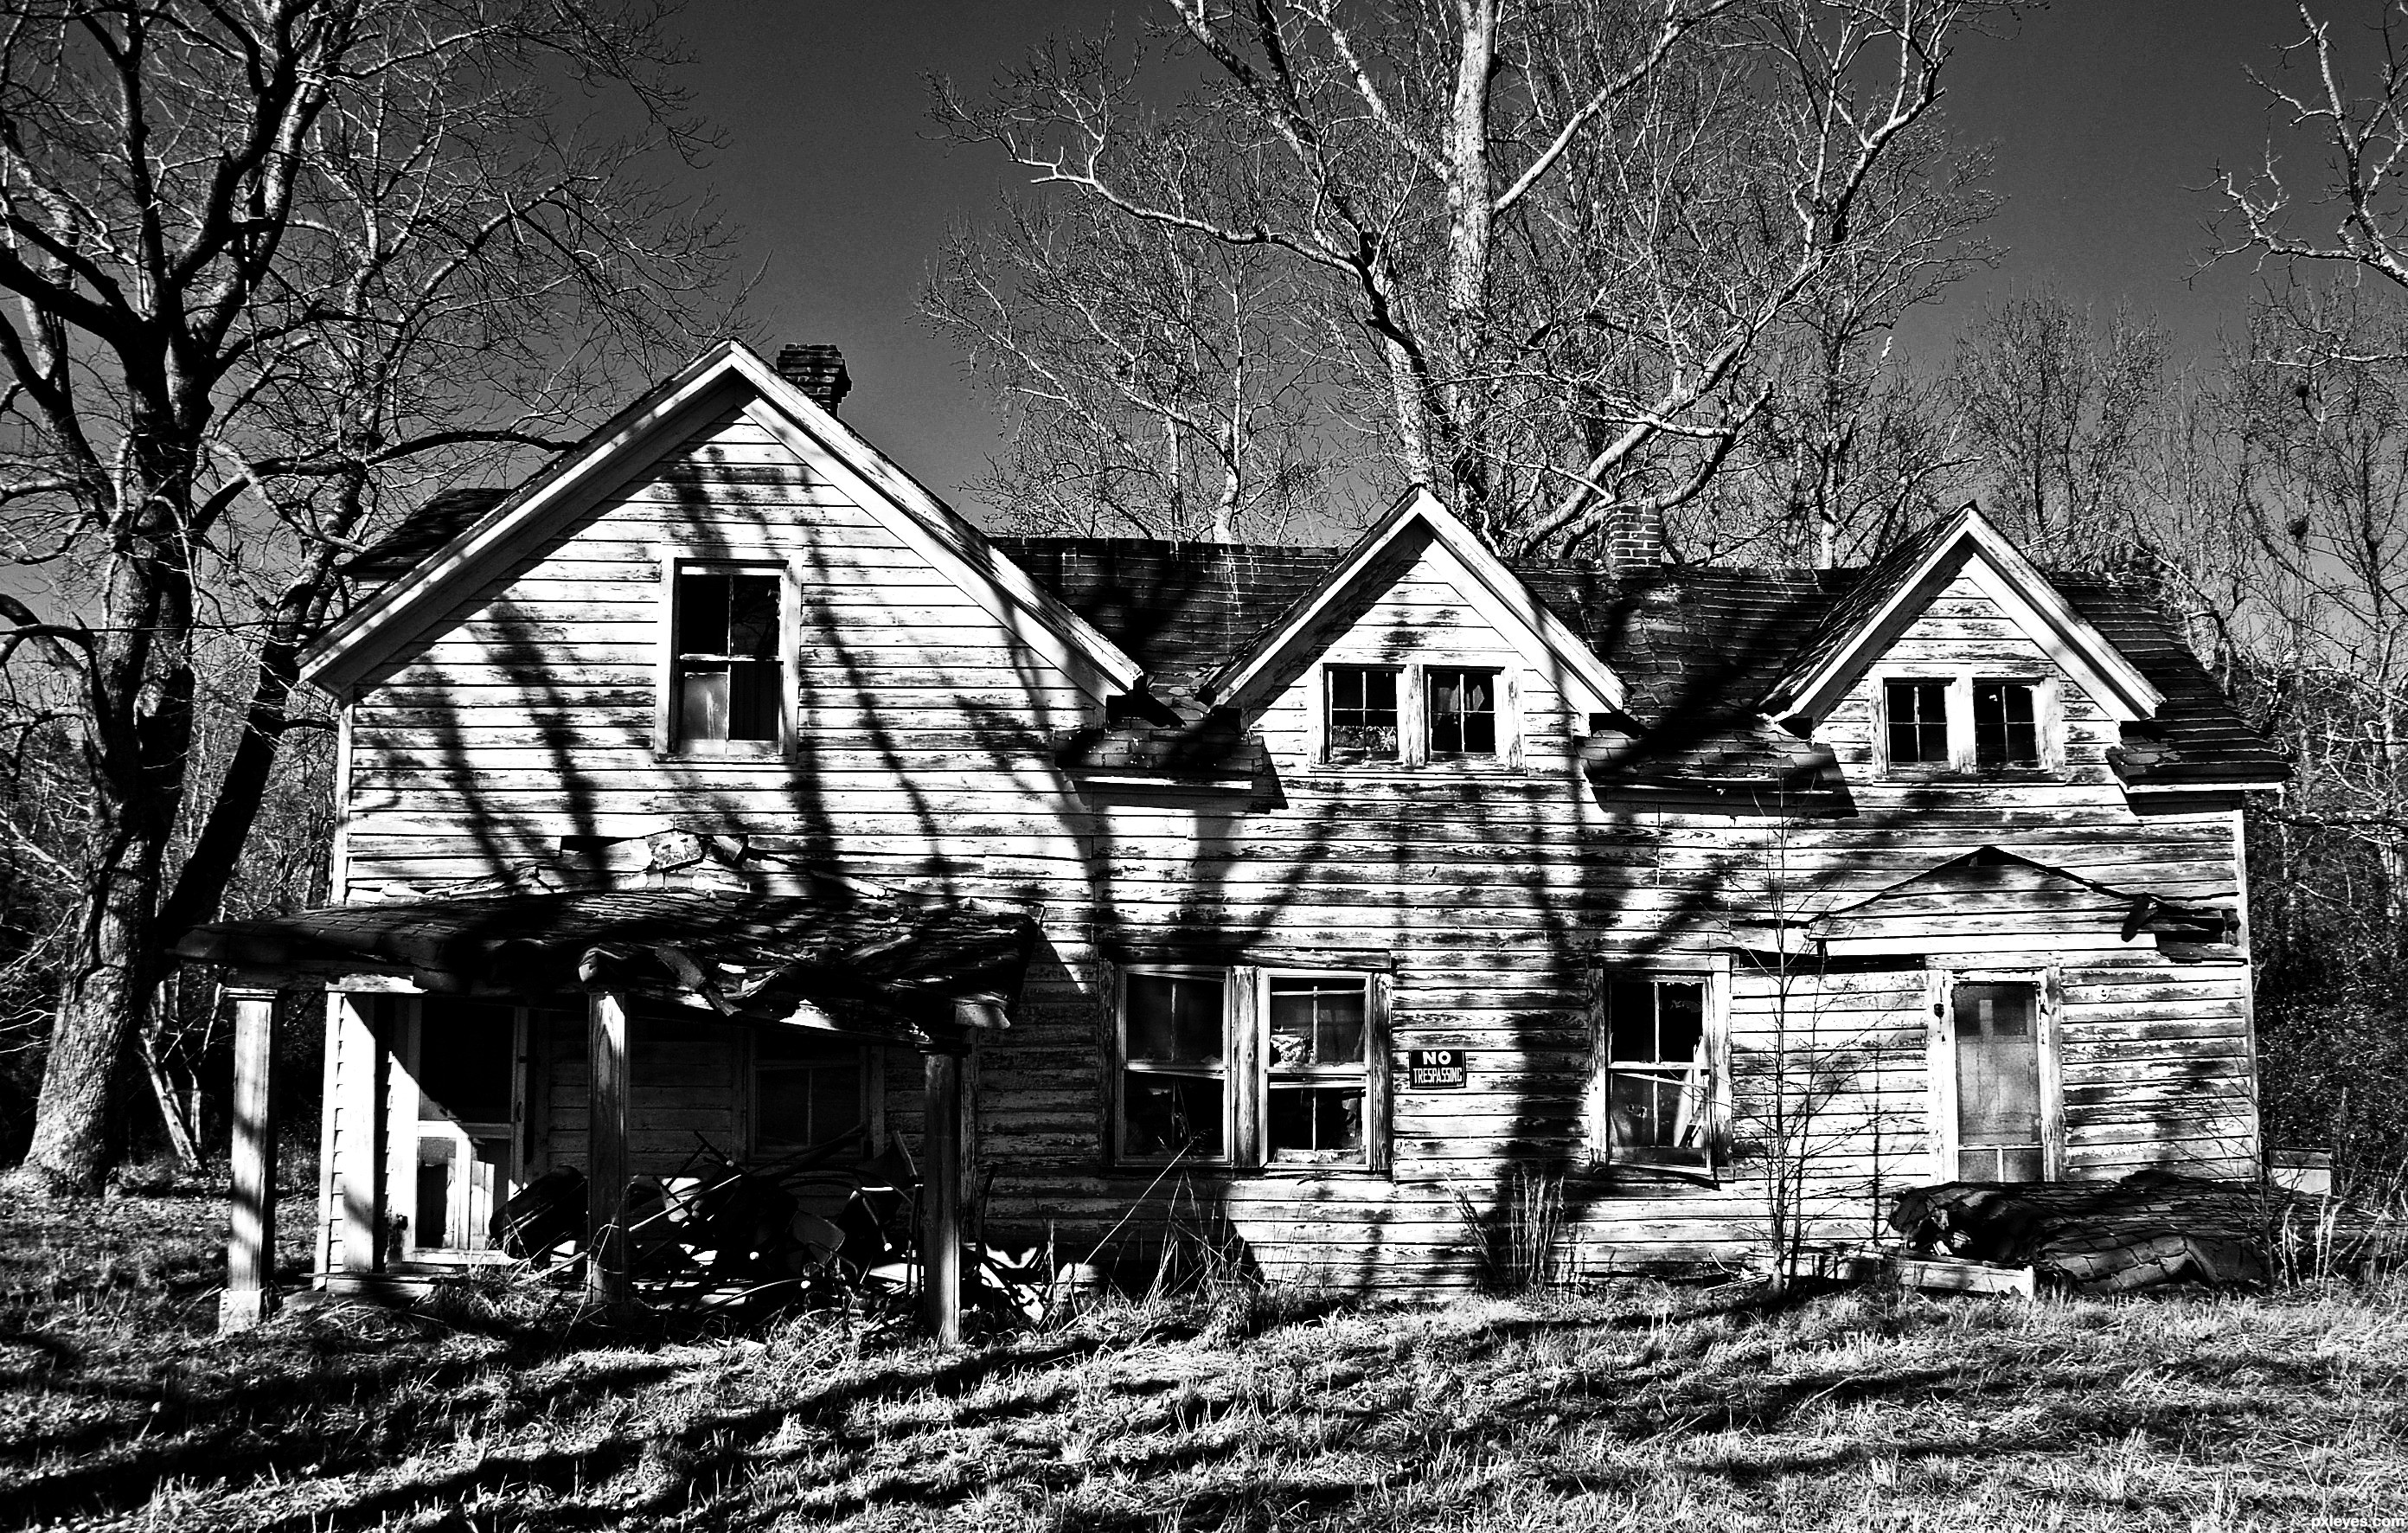 Seen Better Days picture, by photogirl723 for: abandoned buildings 2 ...